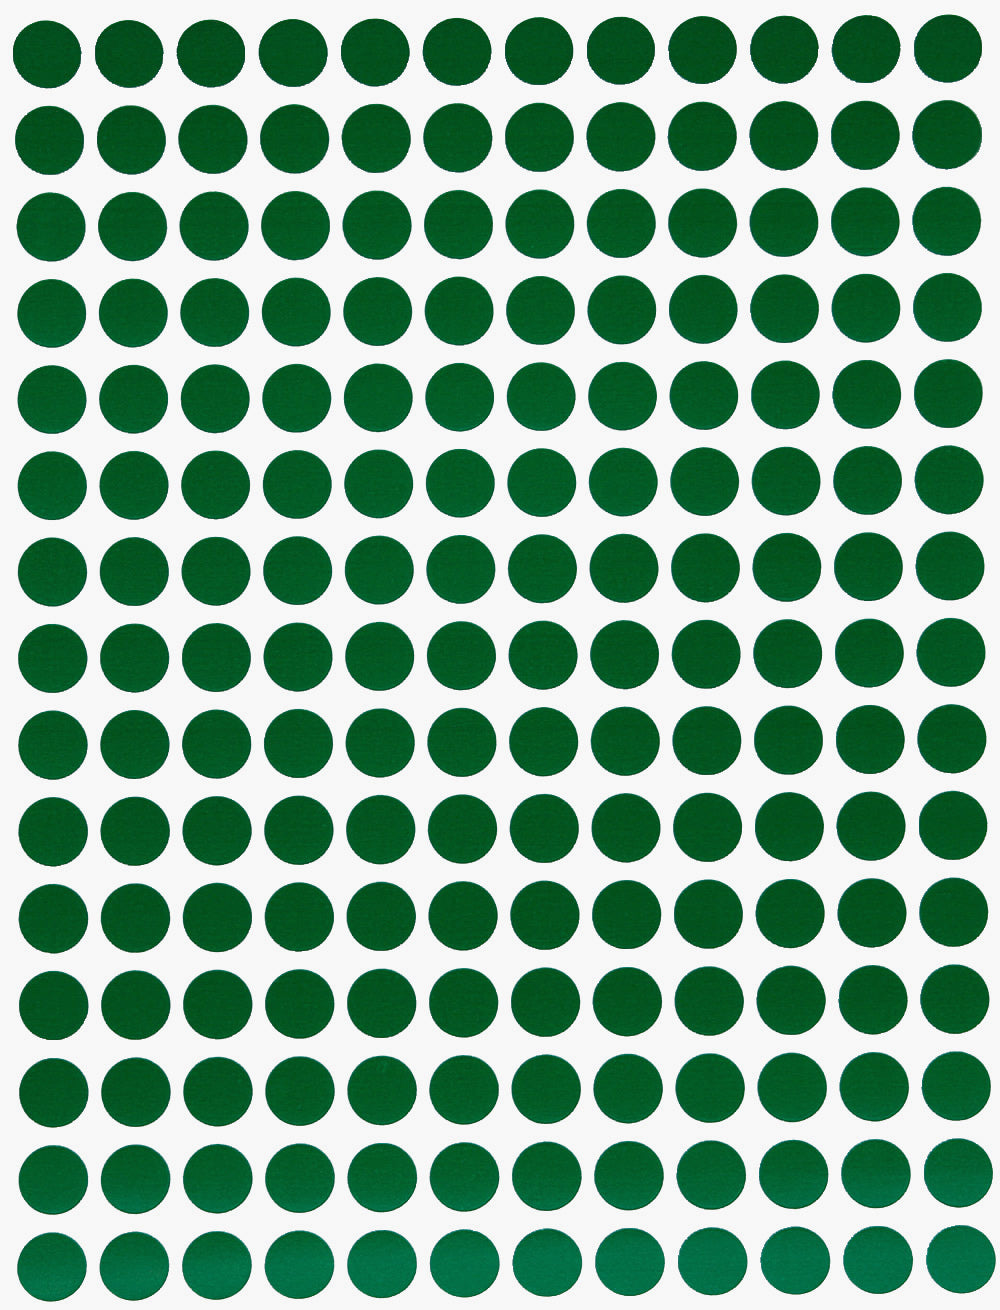 Royal Green Dots Stickers ~ 8mm ¼ inch 9000 / White